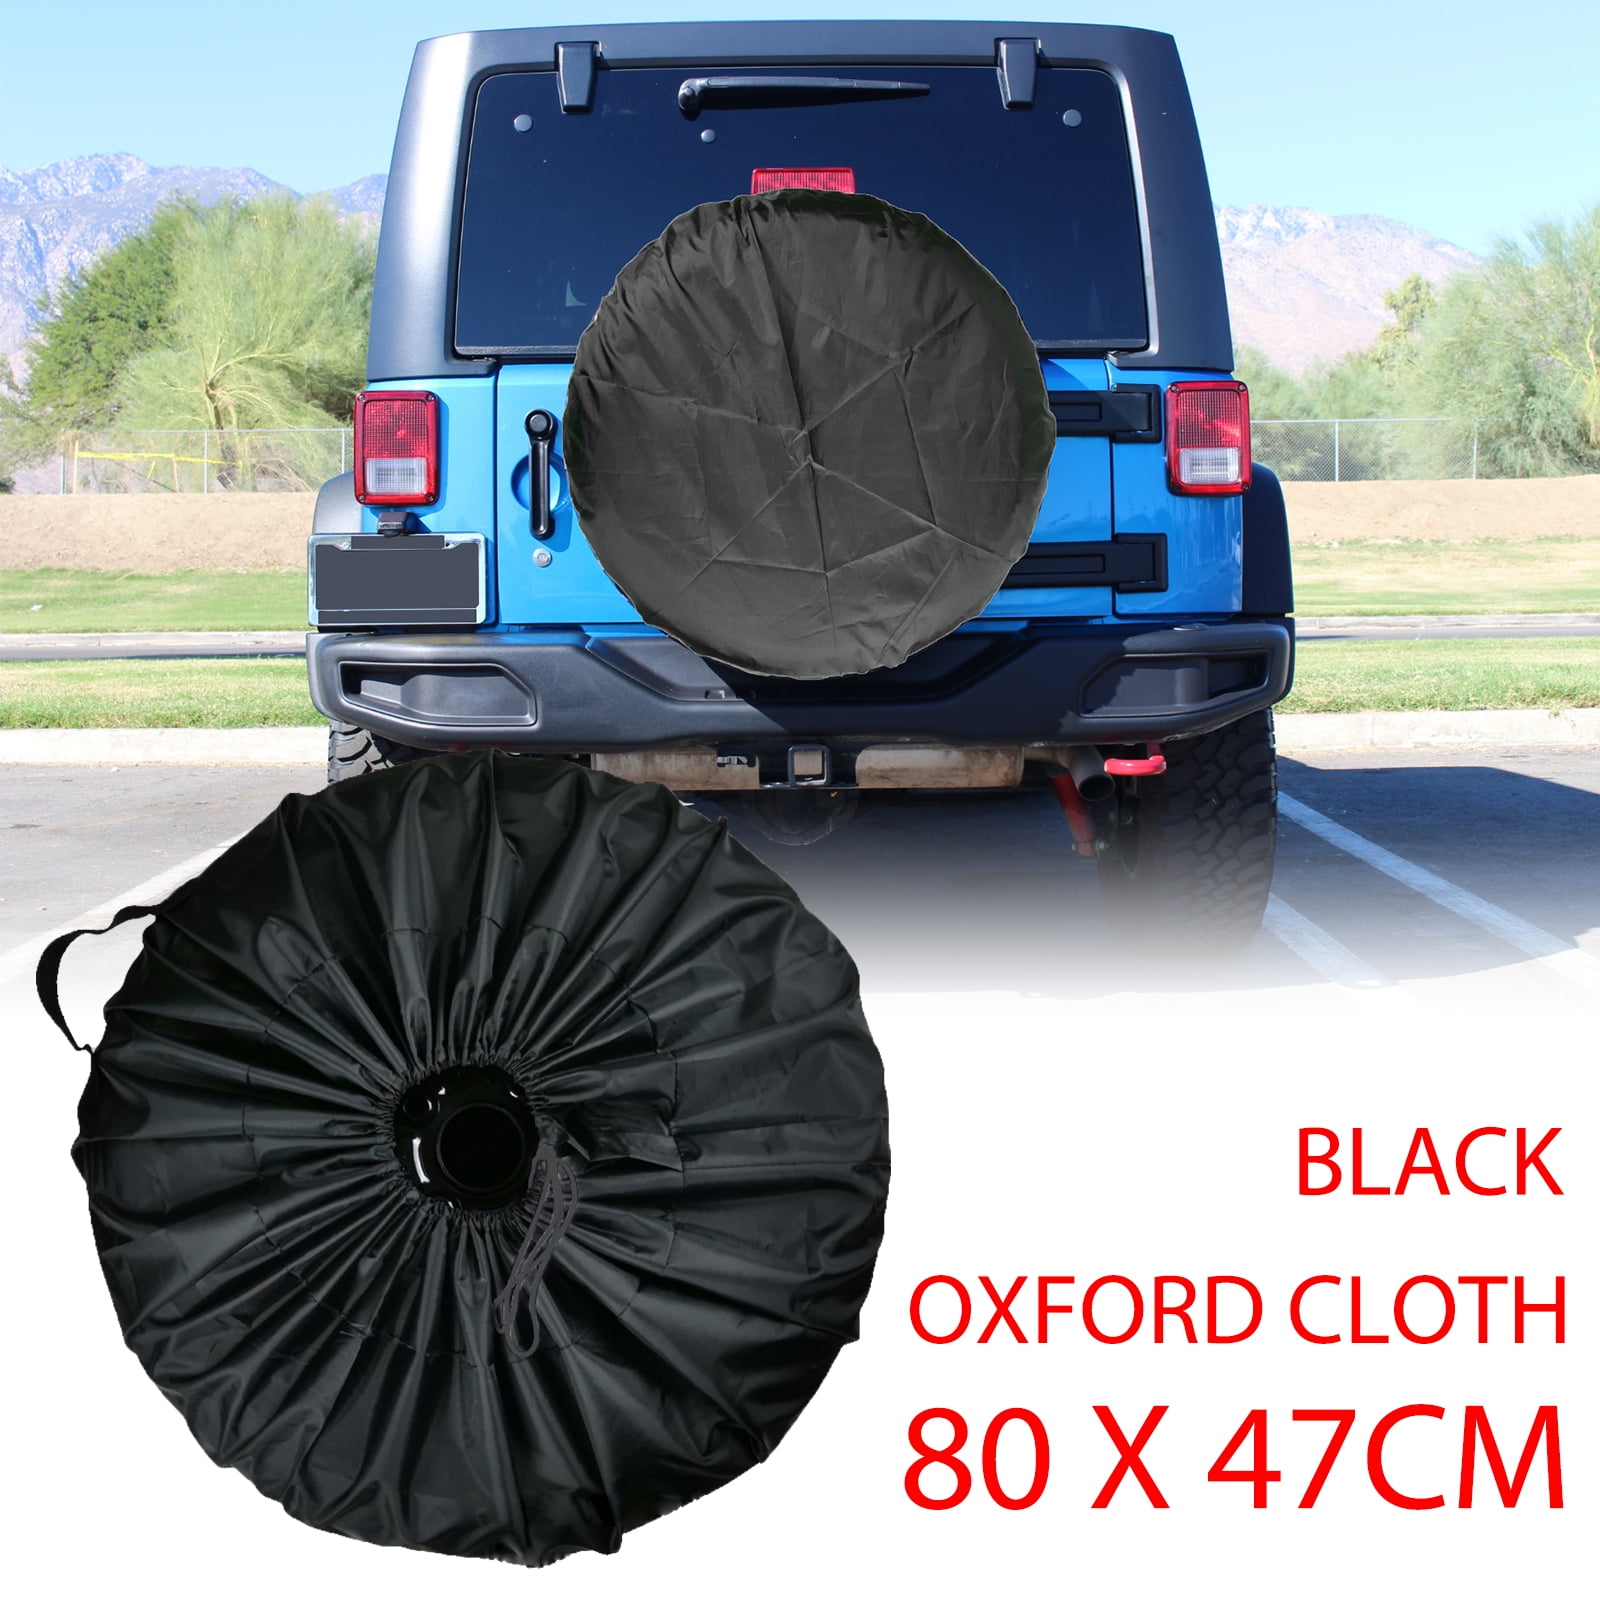 Car Tire Cover Spare Tyre Wheel Covers Protection Universal 210d Oxford Cloth Dustproof Waterproof,fits For 13 To 19 Tire Diameters Large